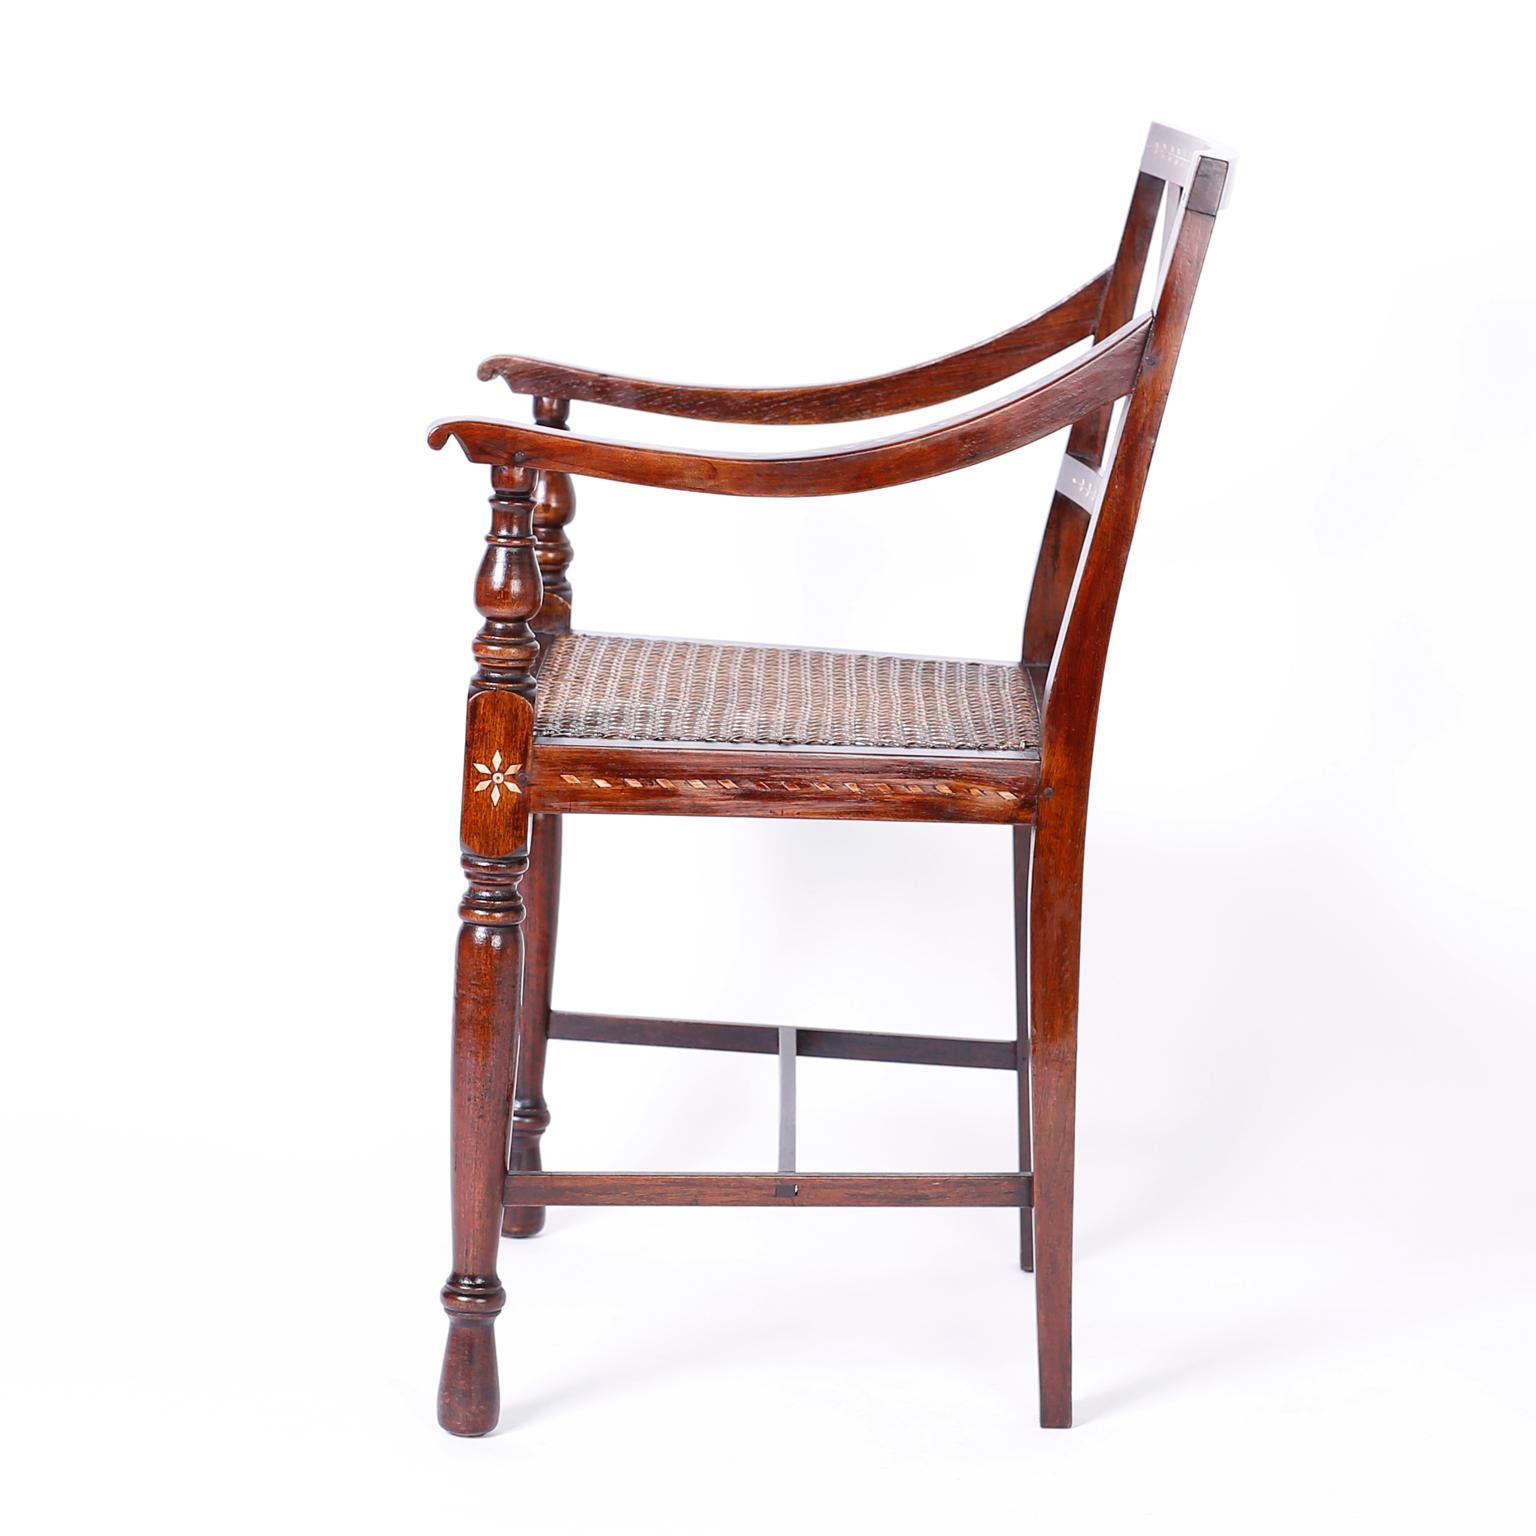 Set of eight British colonial armchairs crafted in mahogany featuring floral bone inlays, pegged construction, caned seats and turned front arm supports and legs. These chairs are excellent examples of the Philippine school of cabinetmaking, with